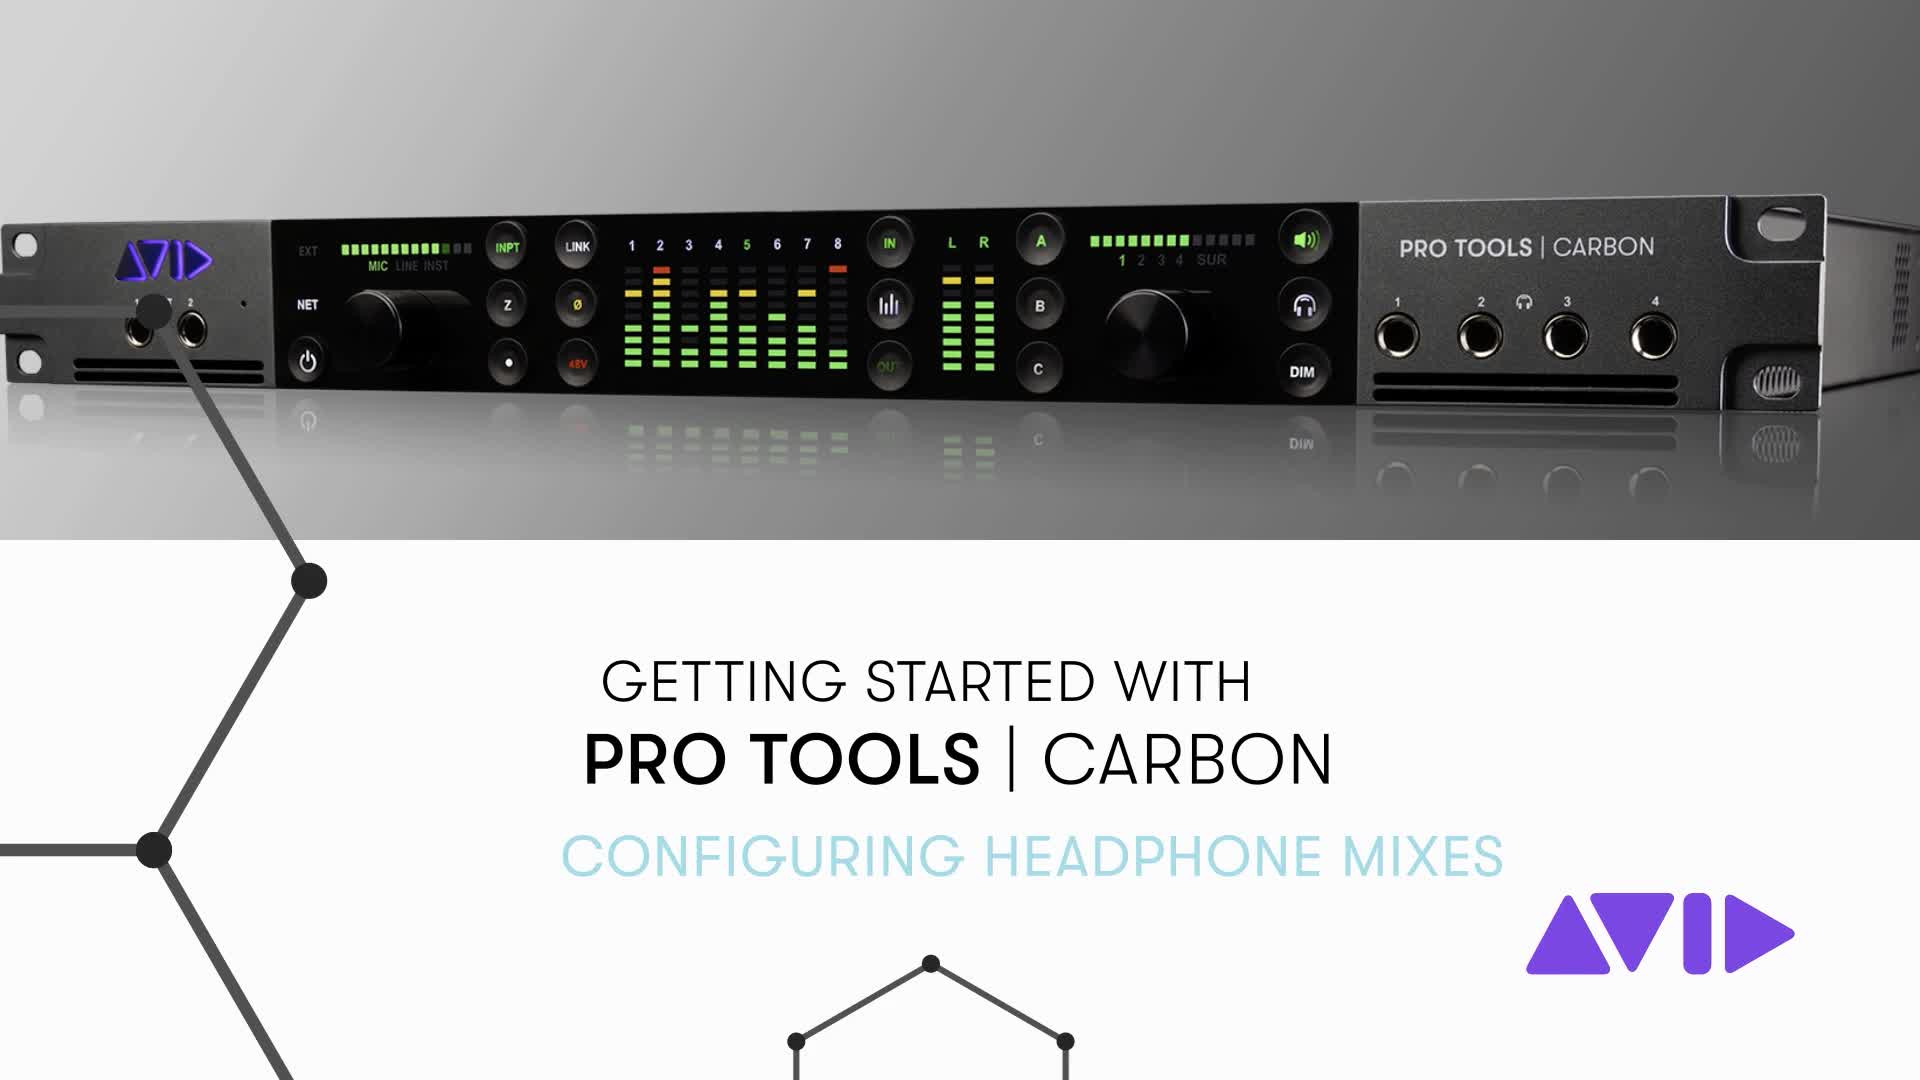 06 Pro Tools Carbon Getting Started - Configuring Headphone Mixes